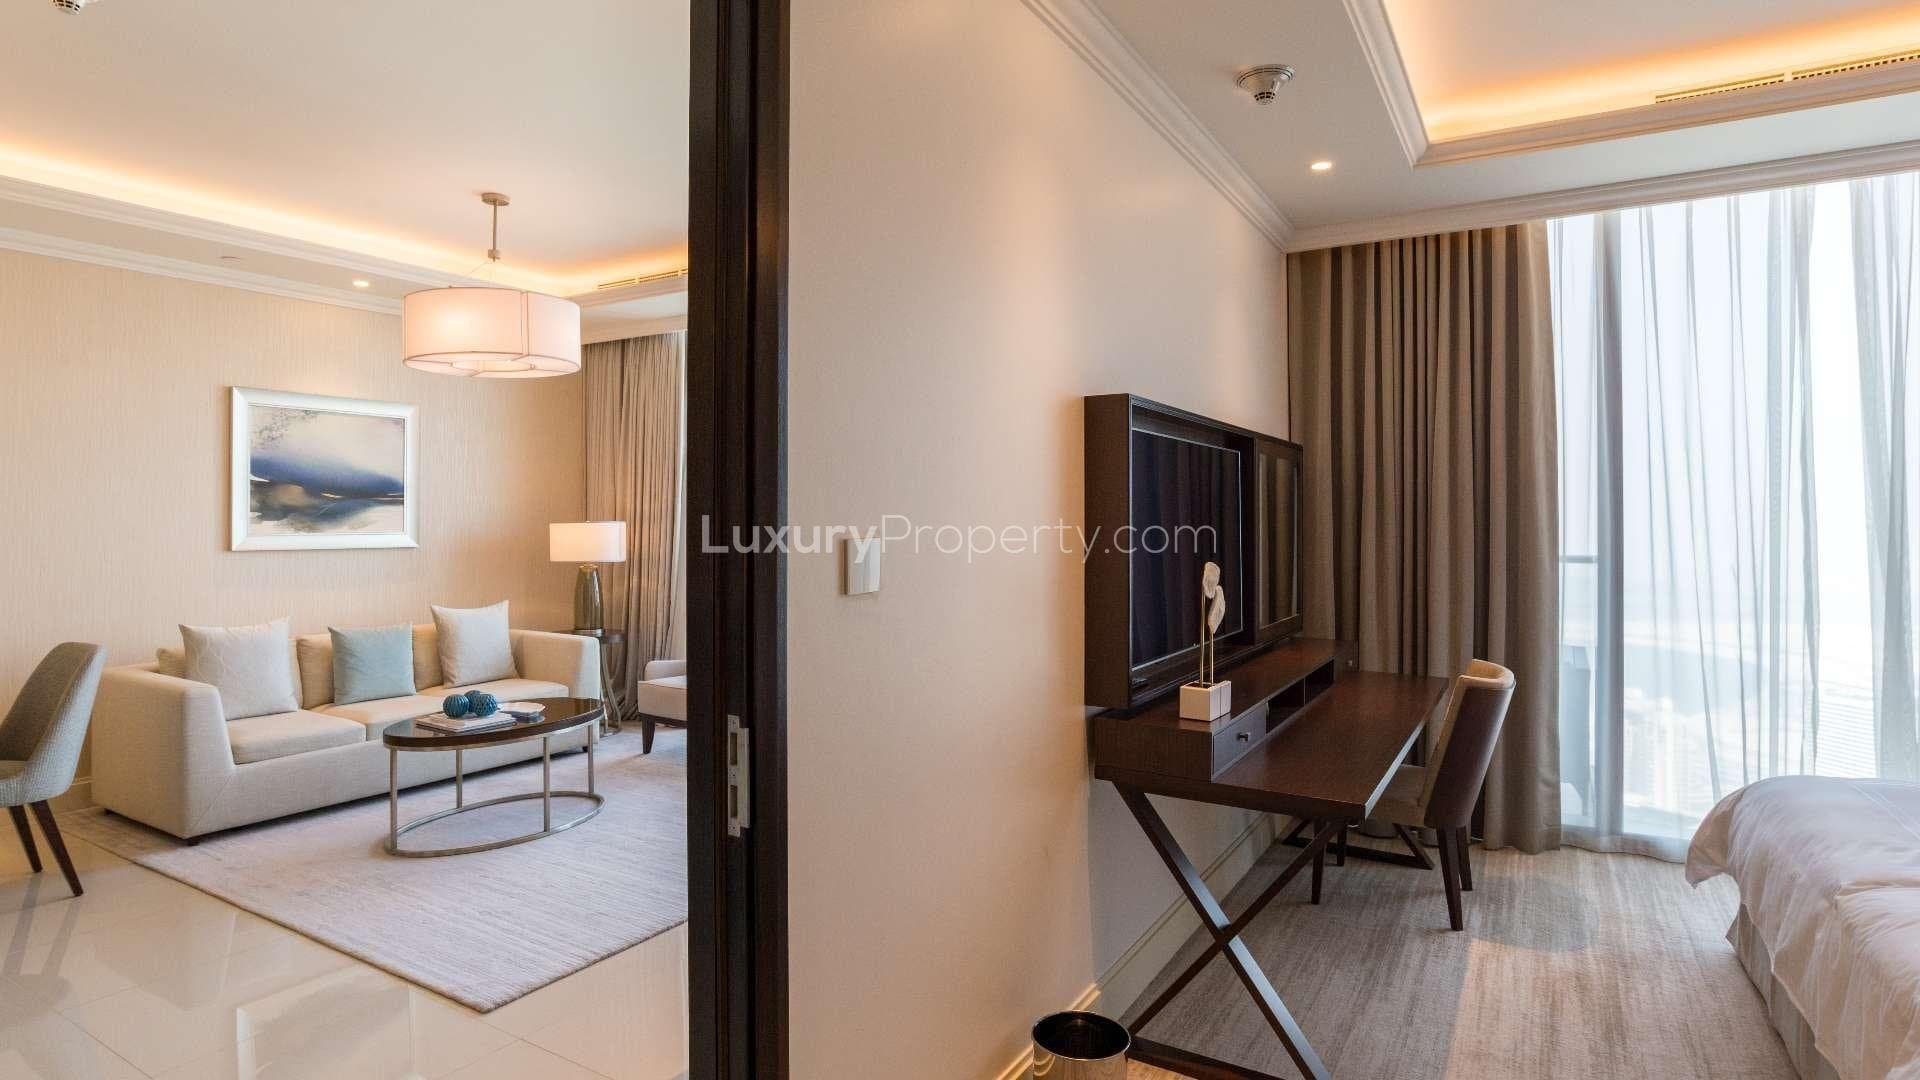 1 Bedroom Apartment For Sale The Address Residence Fountain Views Lp20135 10dd1d05c29faa0.jpg